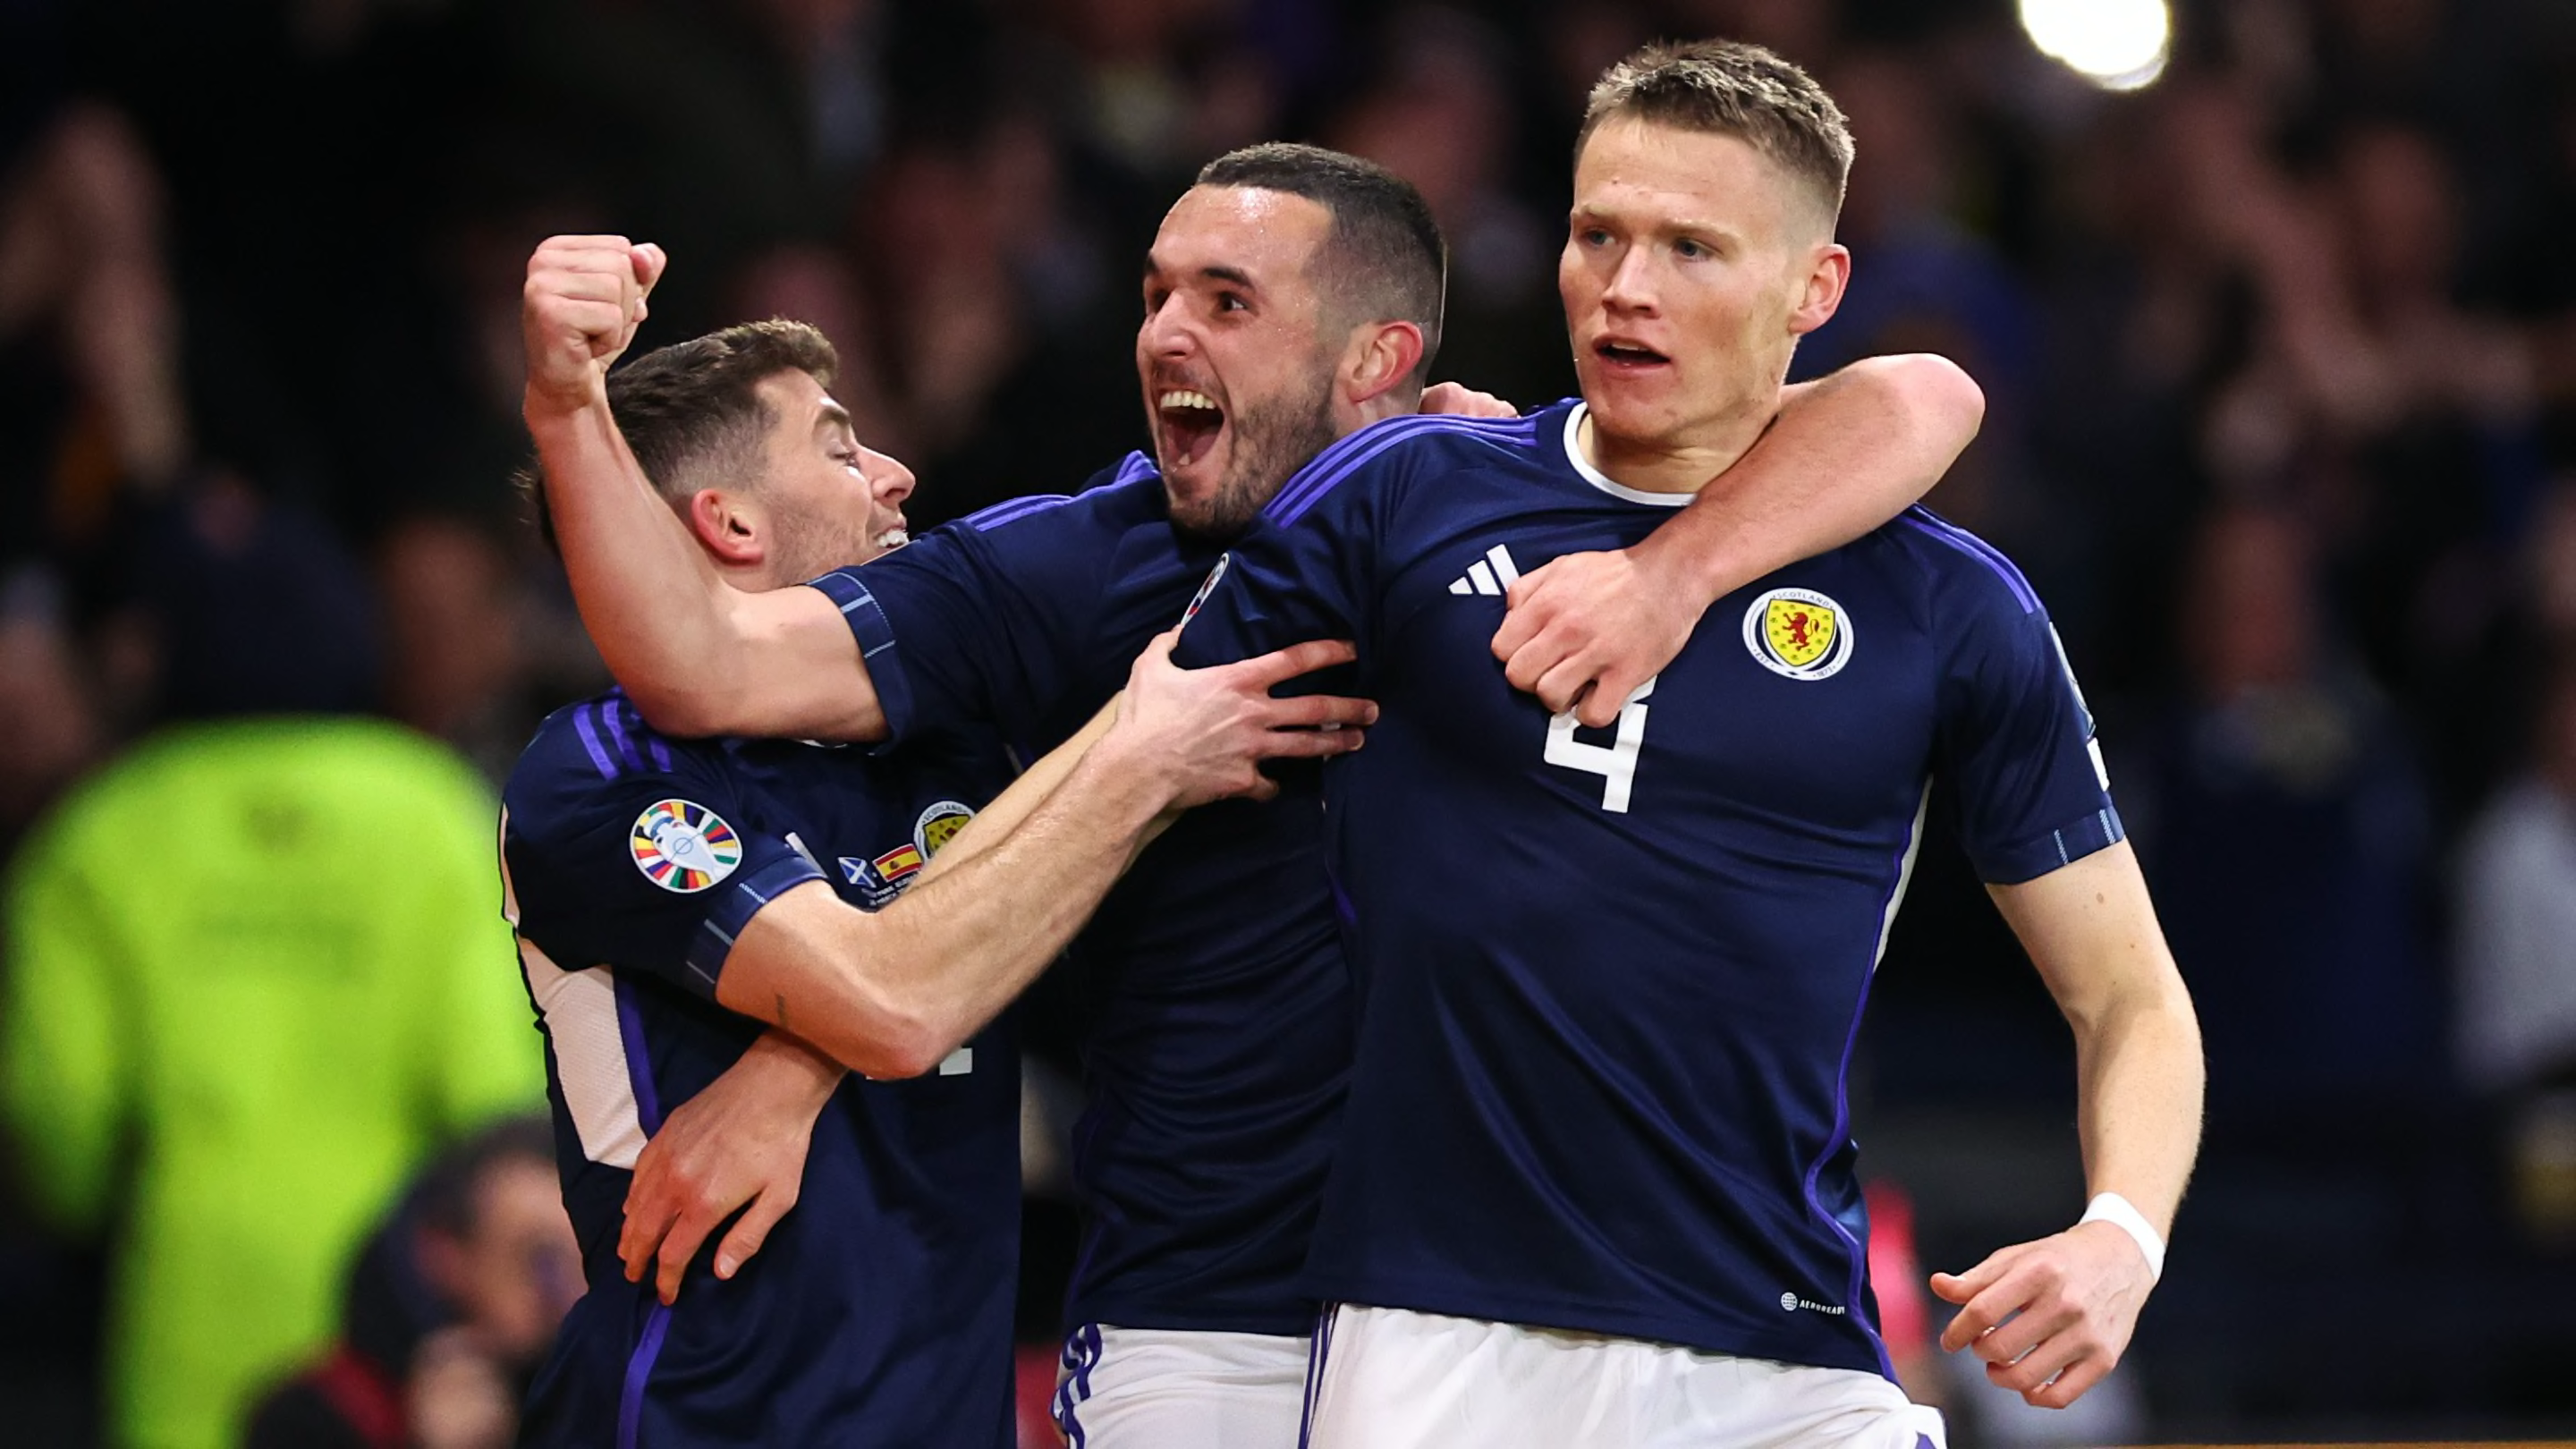 Scotland 2-0 Spain: Player ratings as McTominay double earns Scots shock win